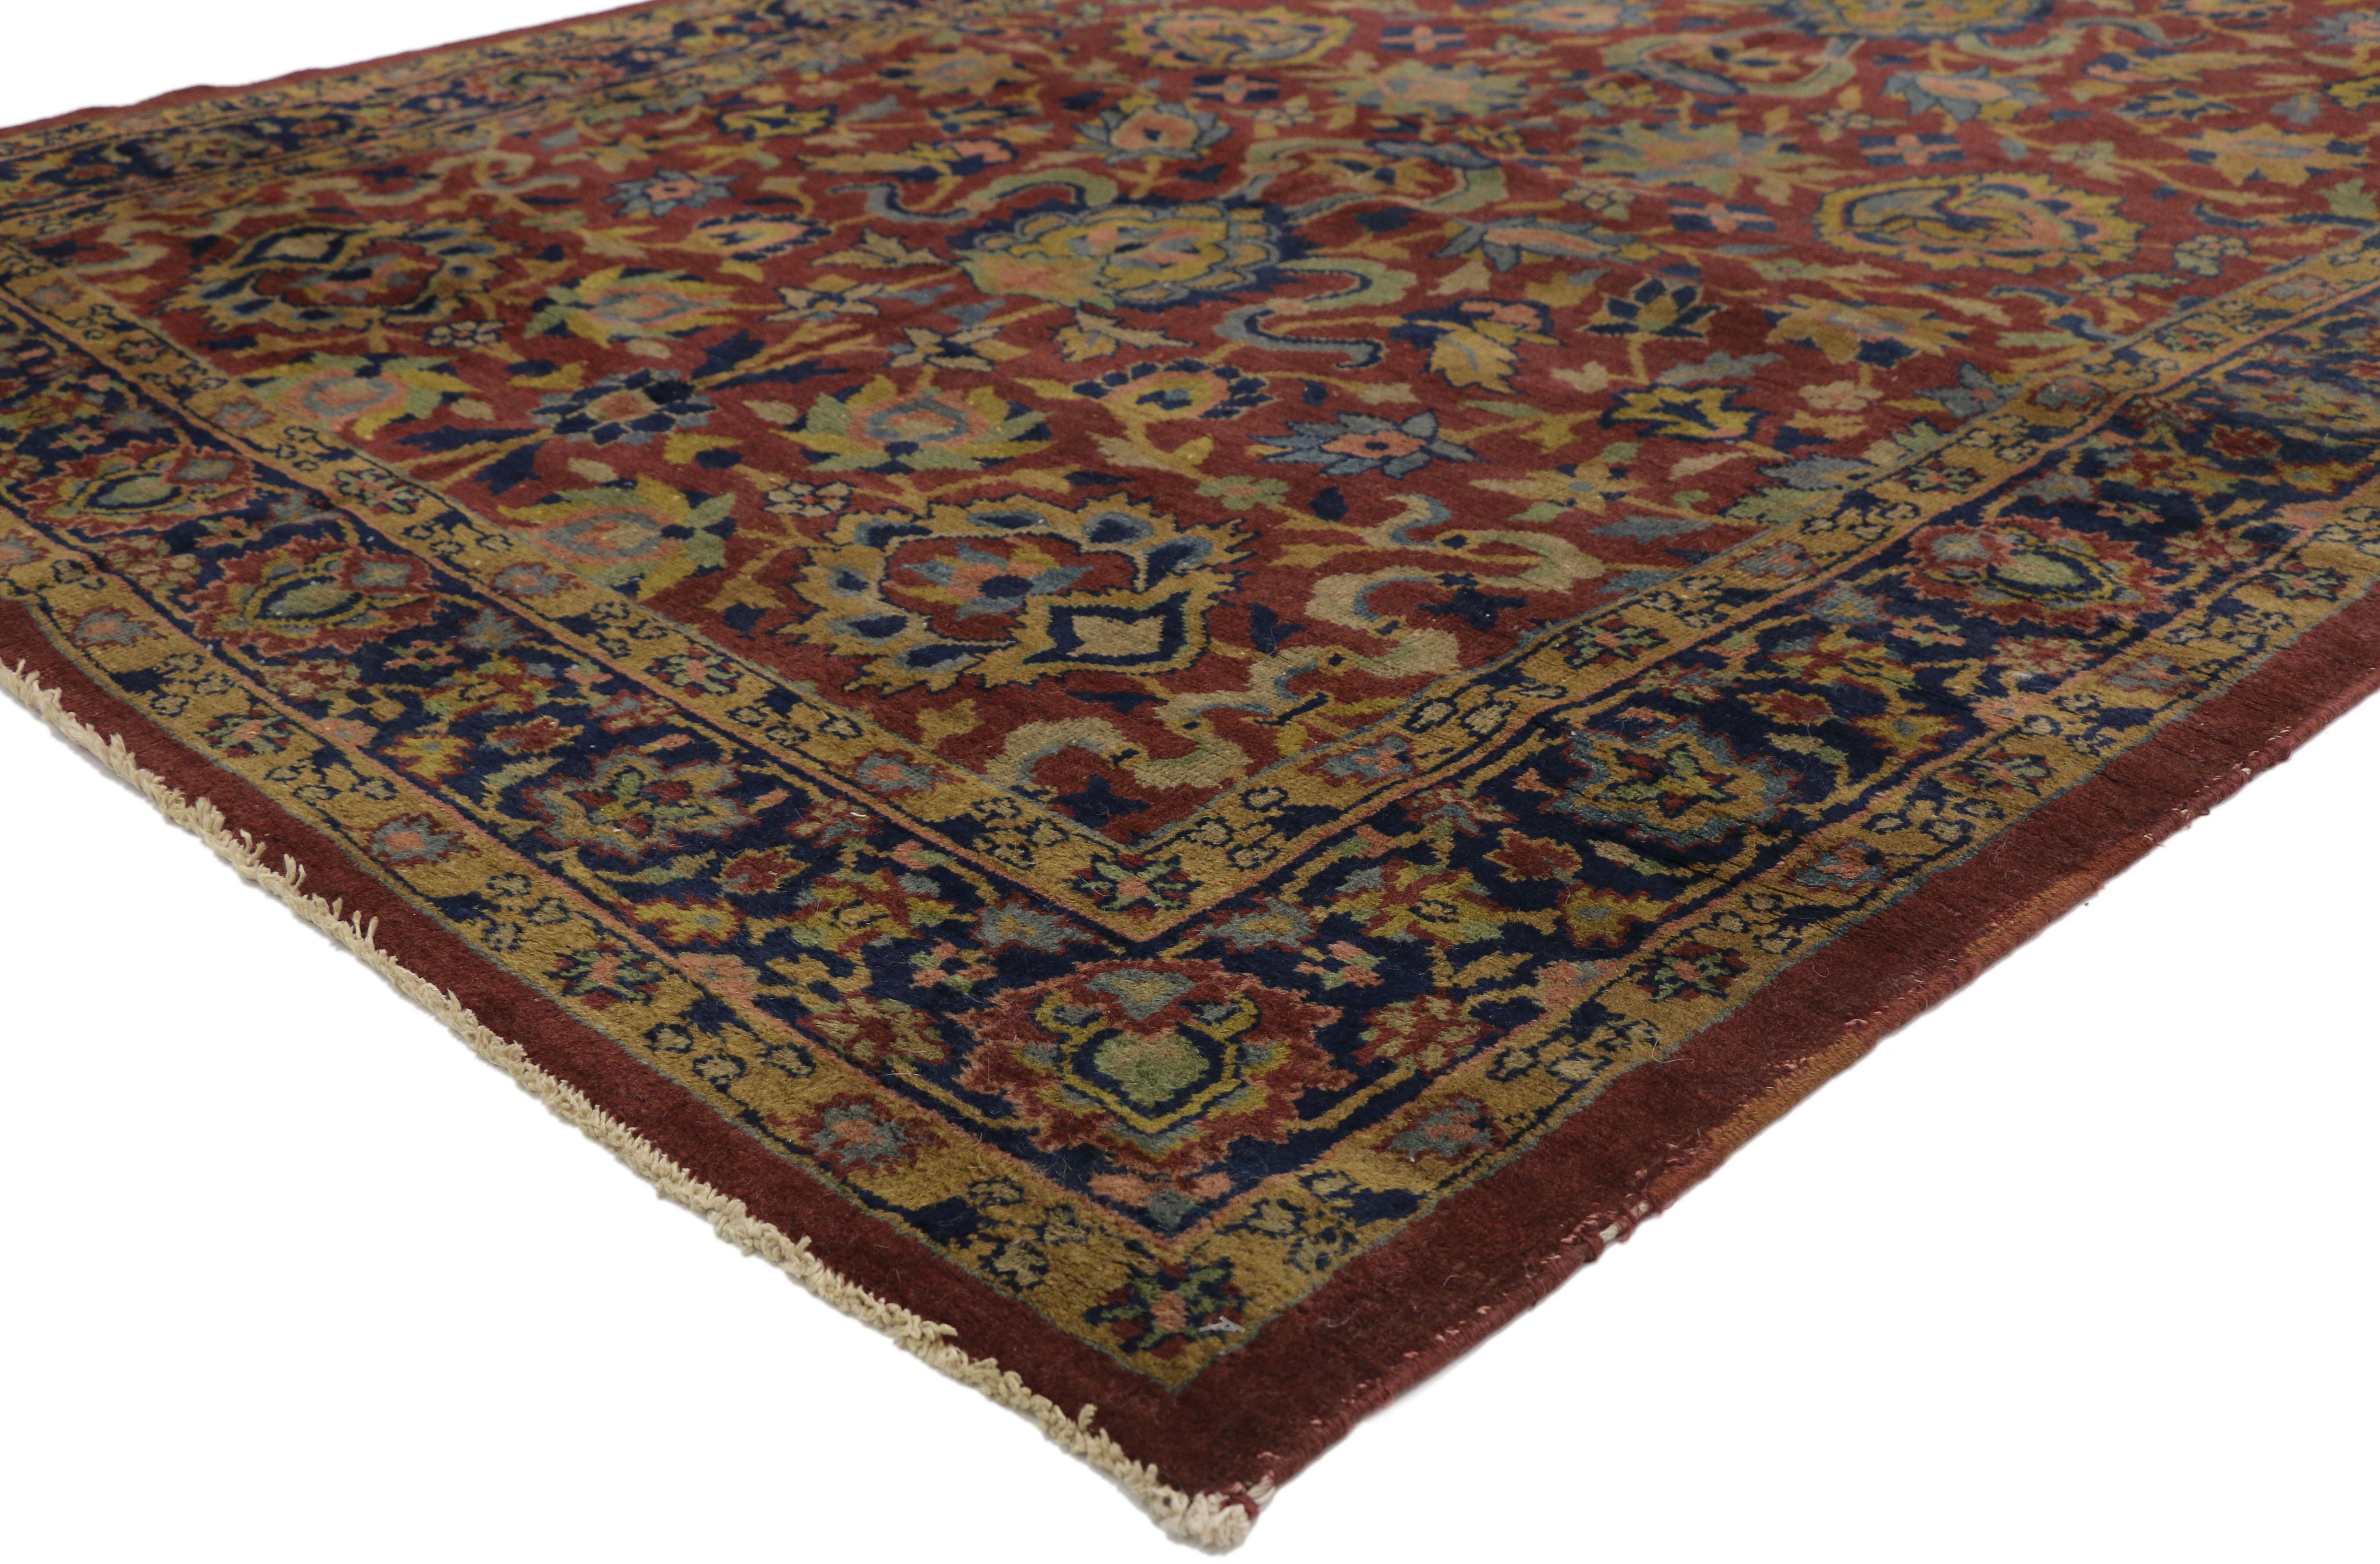 72059, antique Indian Agra William Morris Inspired Gallery rug with Arts & Crafts style. With architectural elements of natualistic forms and earth-tone colors, this hand knotted wool antique Indian Agra gallery rug beautifully embodies Arts &